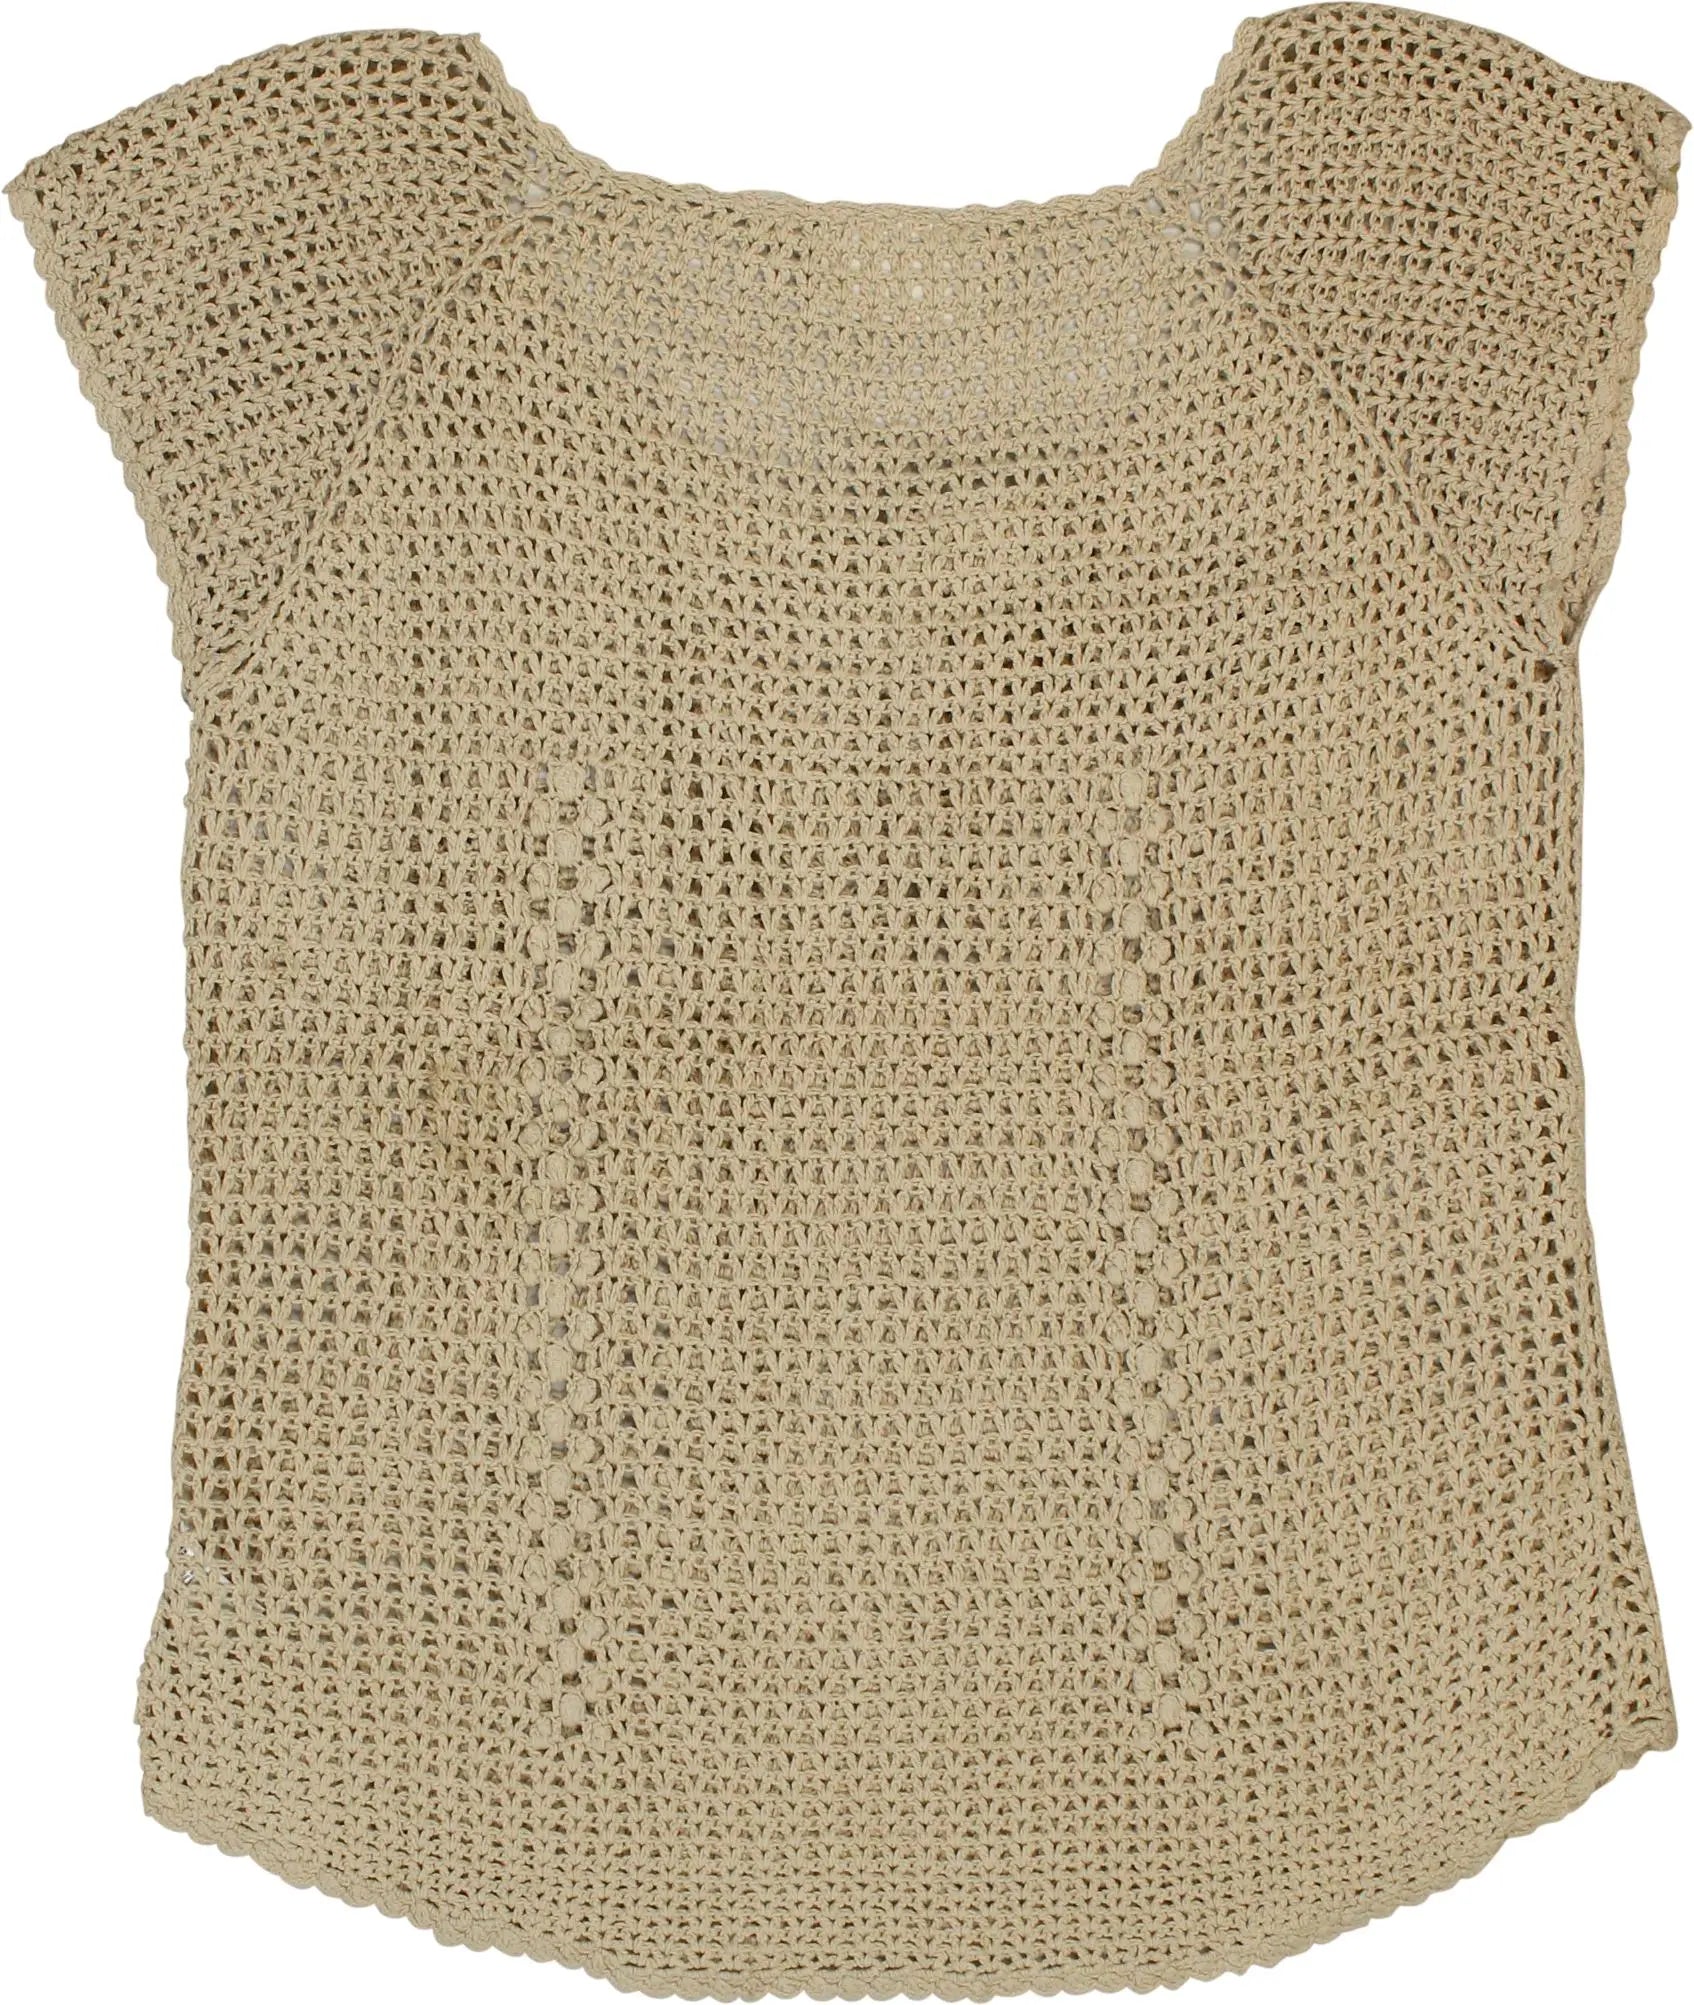 H&M - Crochet Top- ThriftTale.com - Vintage and second handclothing